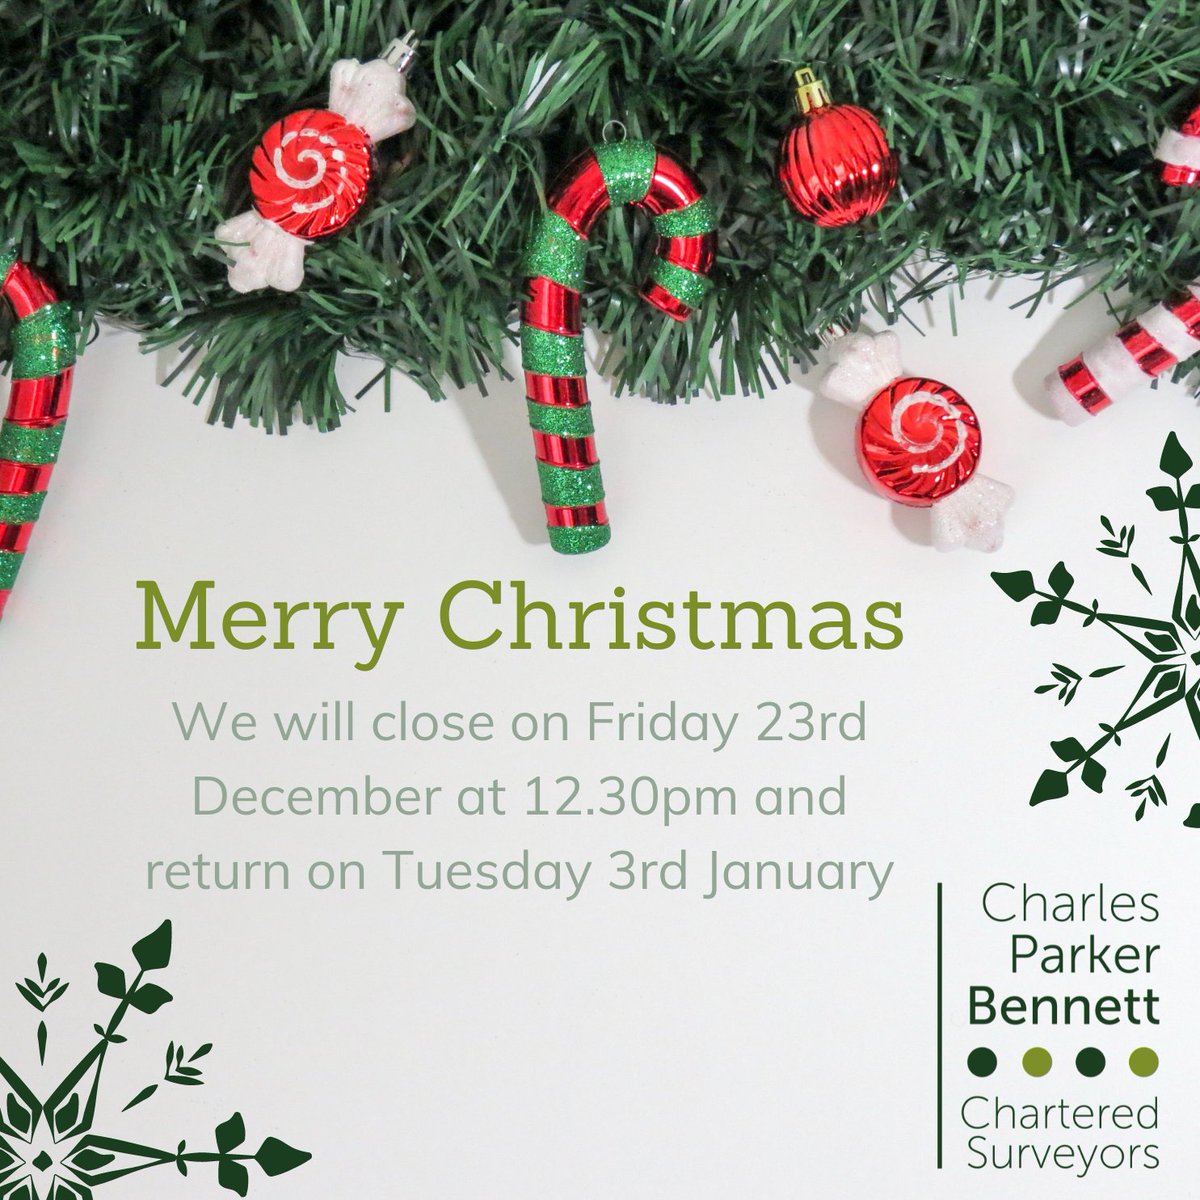 Charles Parker Bennett would like to wish all our clients and fellow professionals a very Merry Christmas and Happy New Year

Our offices will be closing at 12.30pm on Friday 23rd December and reopening on Tuesday 3rd  January

#MerryChristmas #HappyNewYear #CharlesParkerBennett